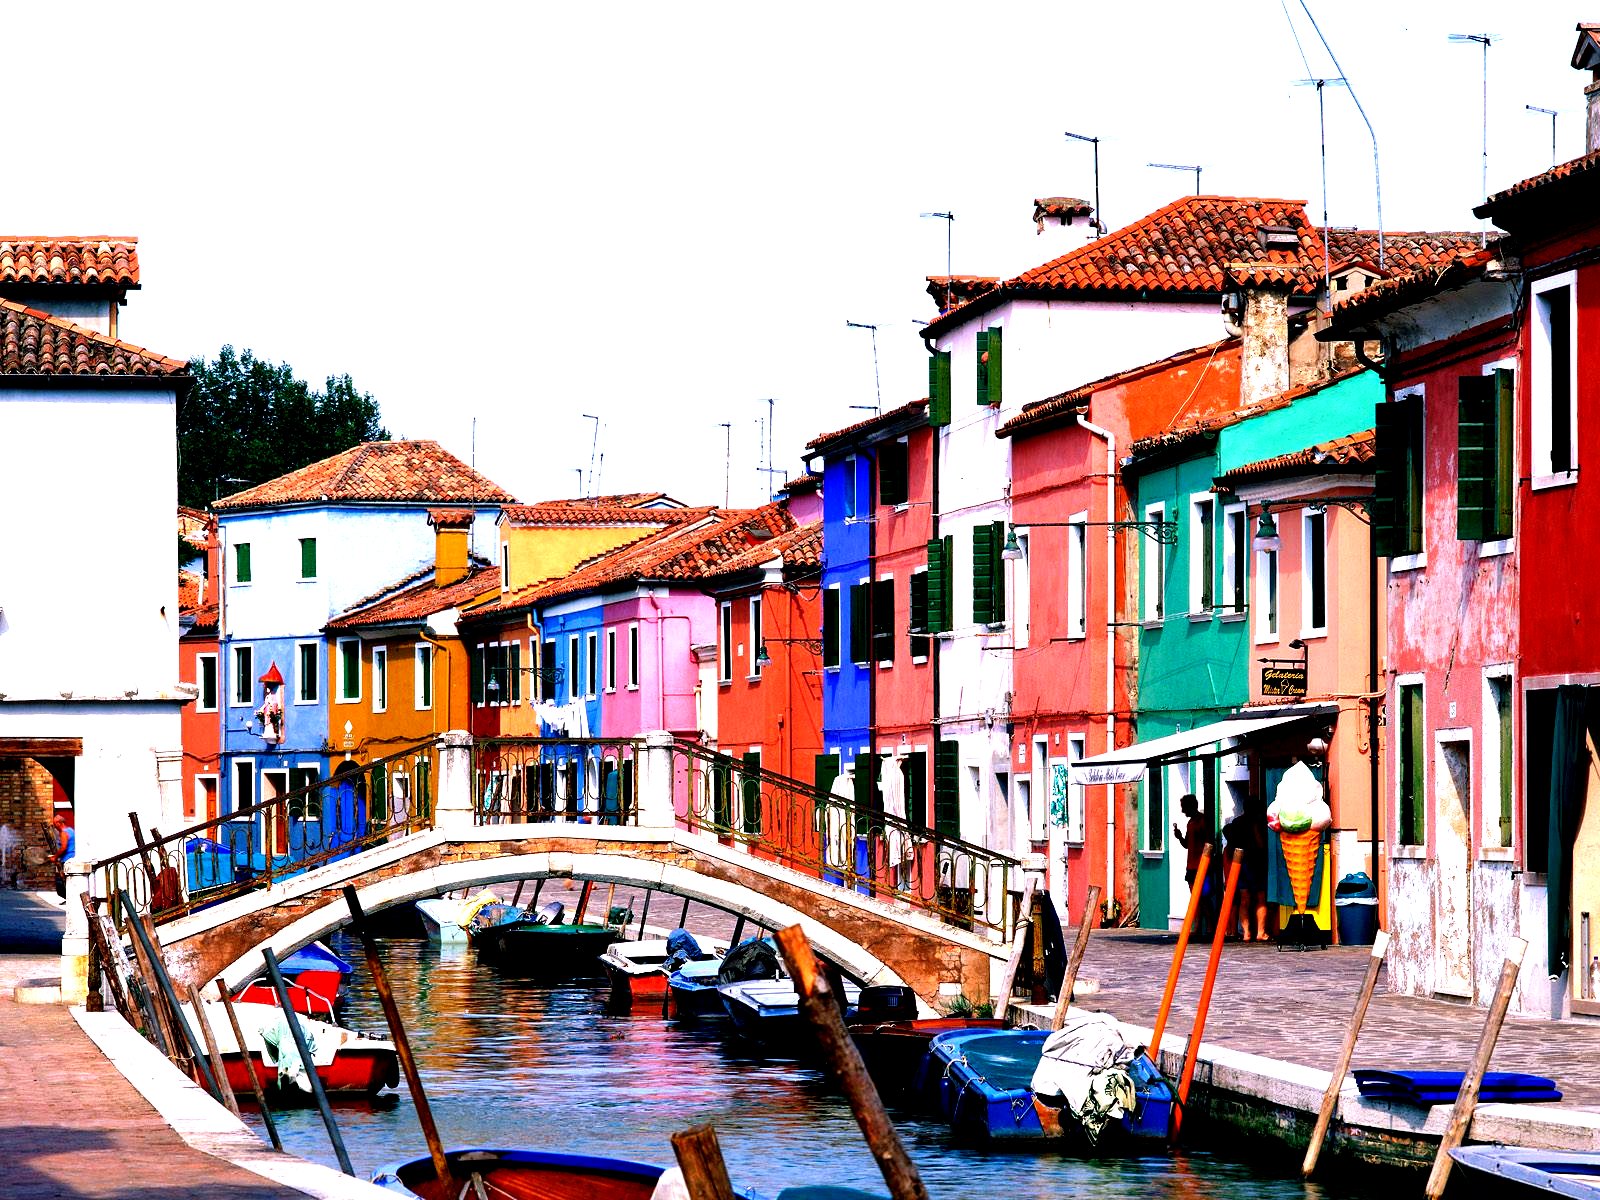 The Flying Tortoise: Burano. The Most Colourful Town In The World...